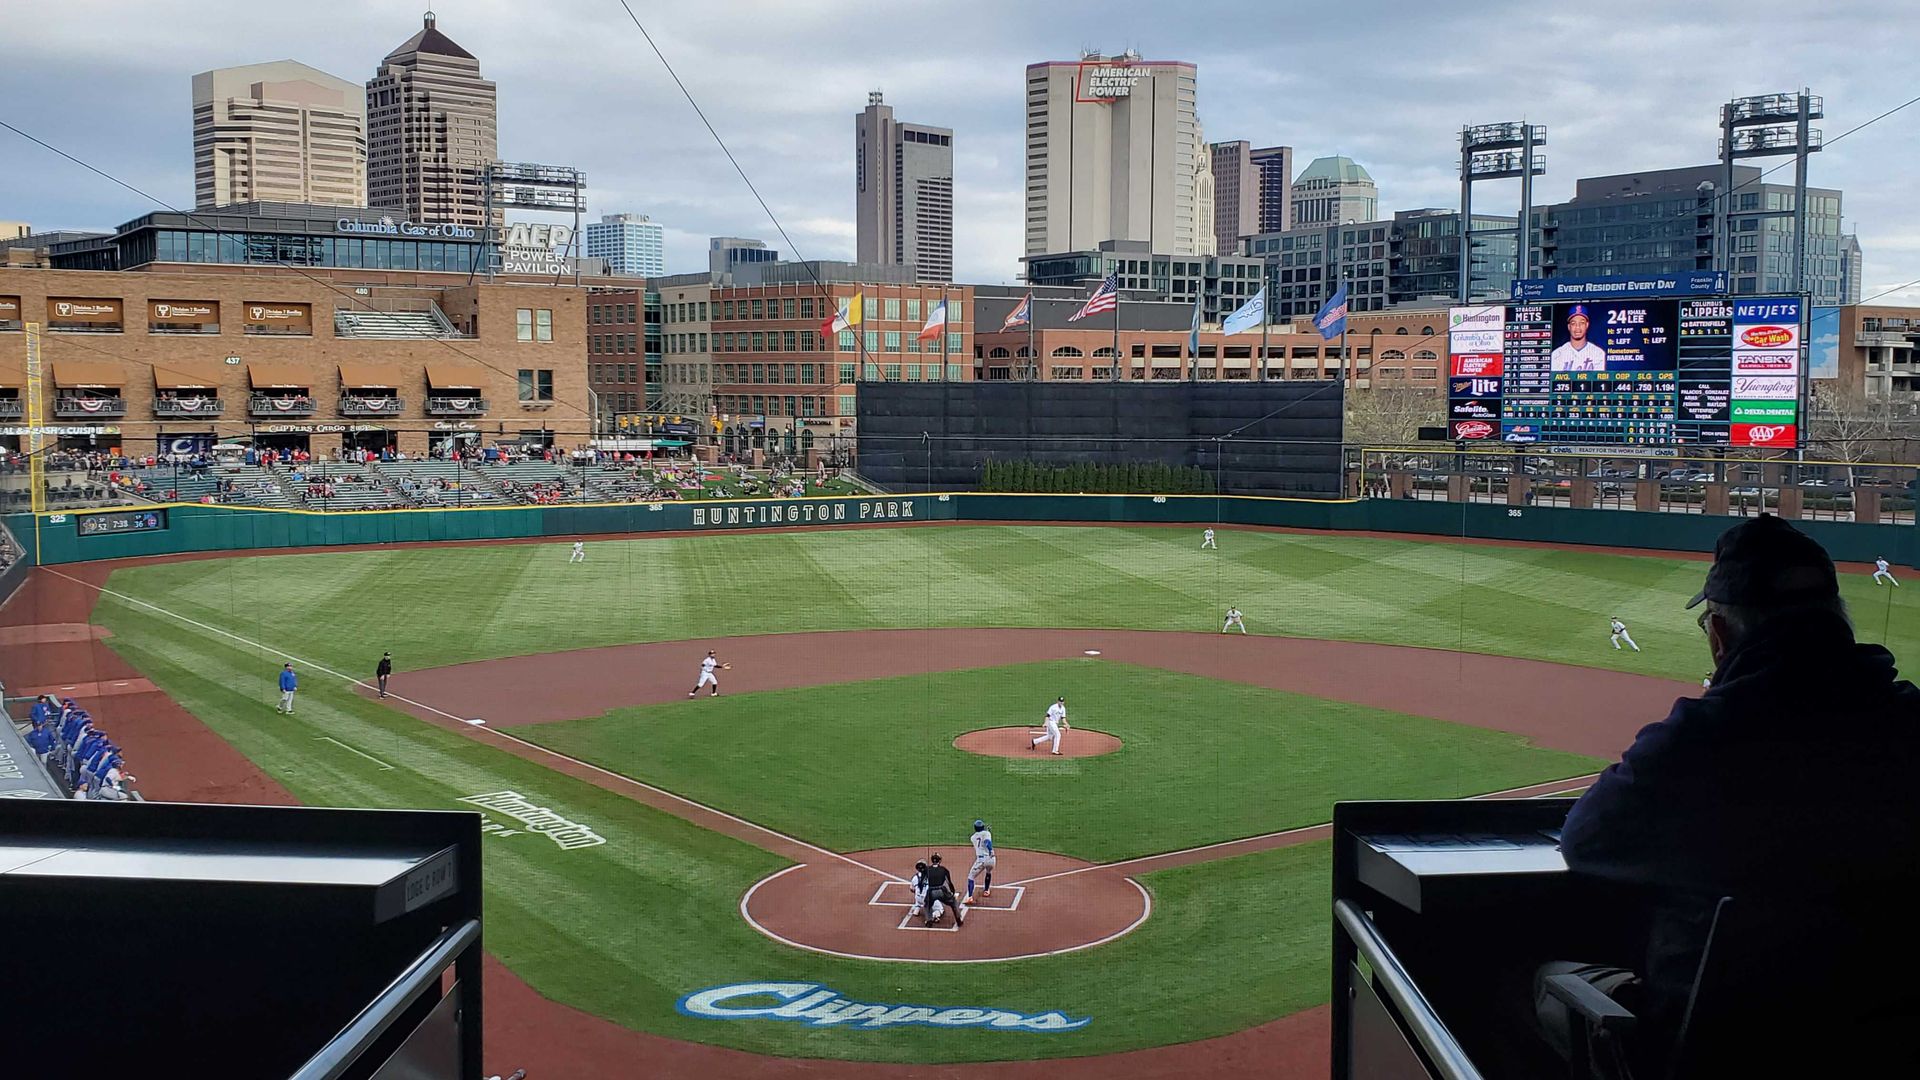 The view of Huntington Park with the Columbus skyline in the background.